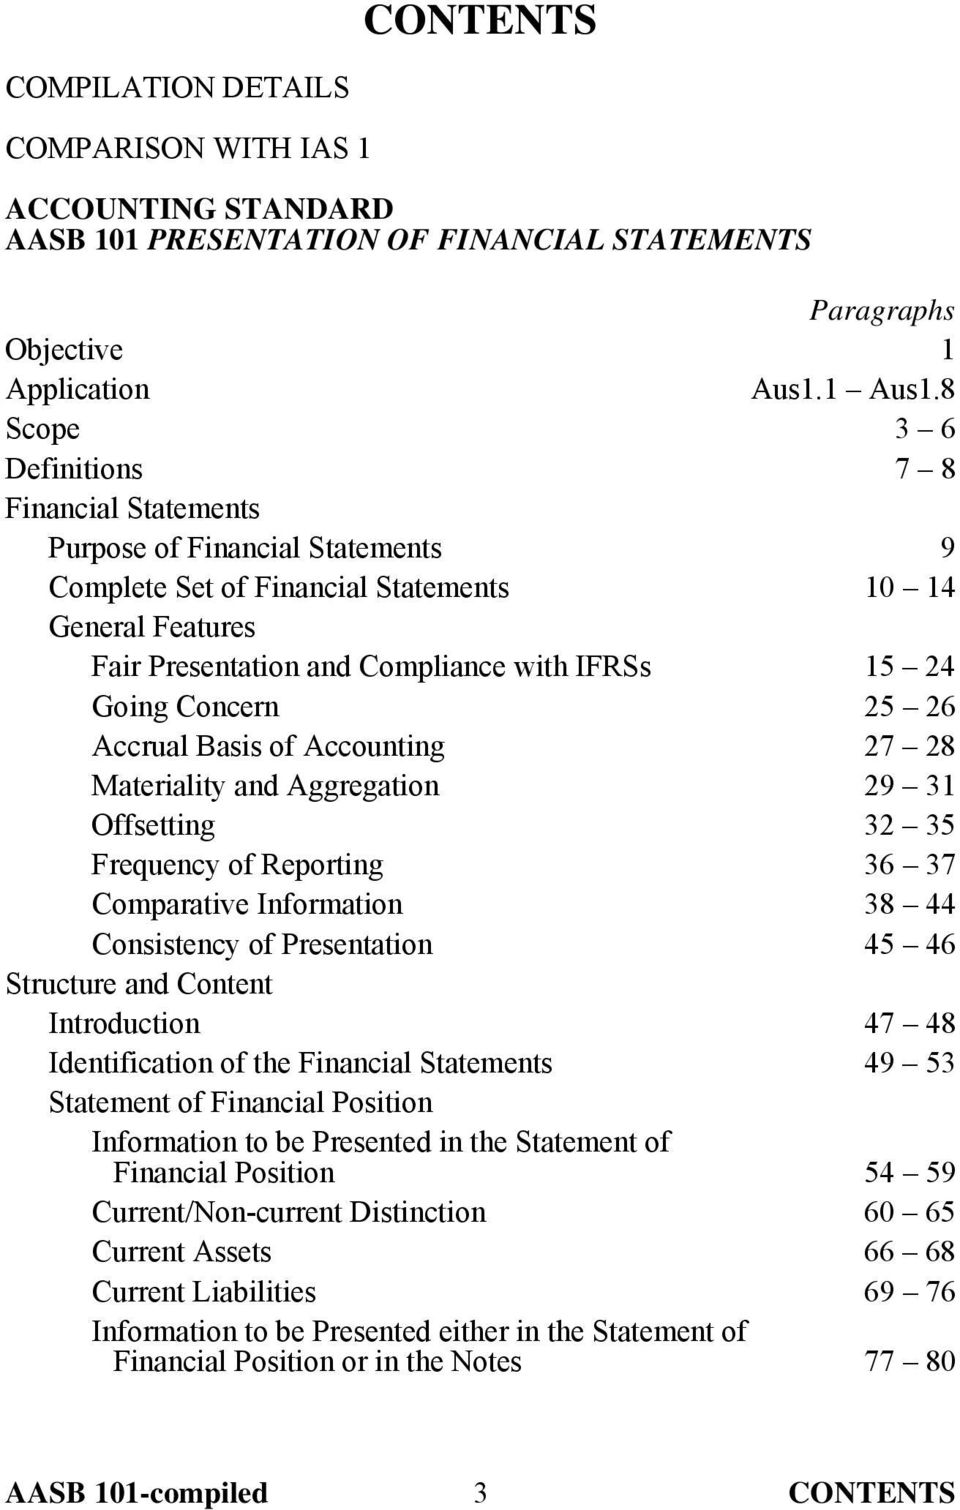 Concern 25 26 Accrual Basis of Accounting 27 28 Materiality and Aggregation 29 31 Offsetting 32 35 Frequency of Reporting 36 37 Comparative Information 38 44 Consistency of Presentation 45 46